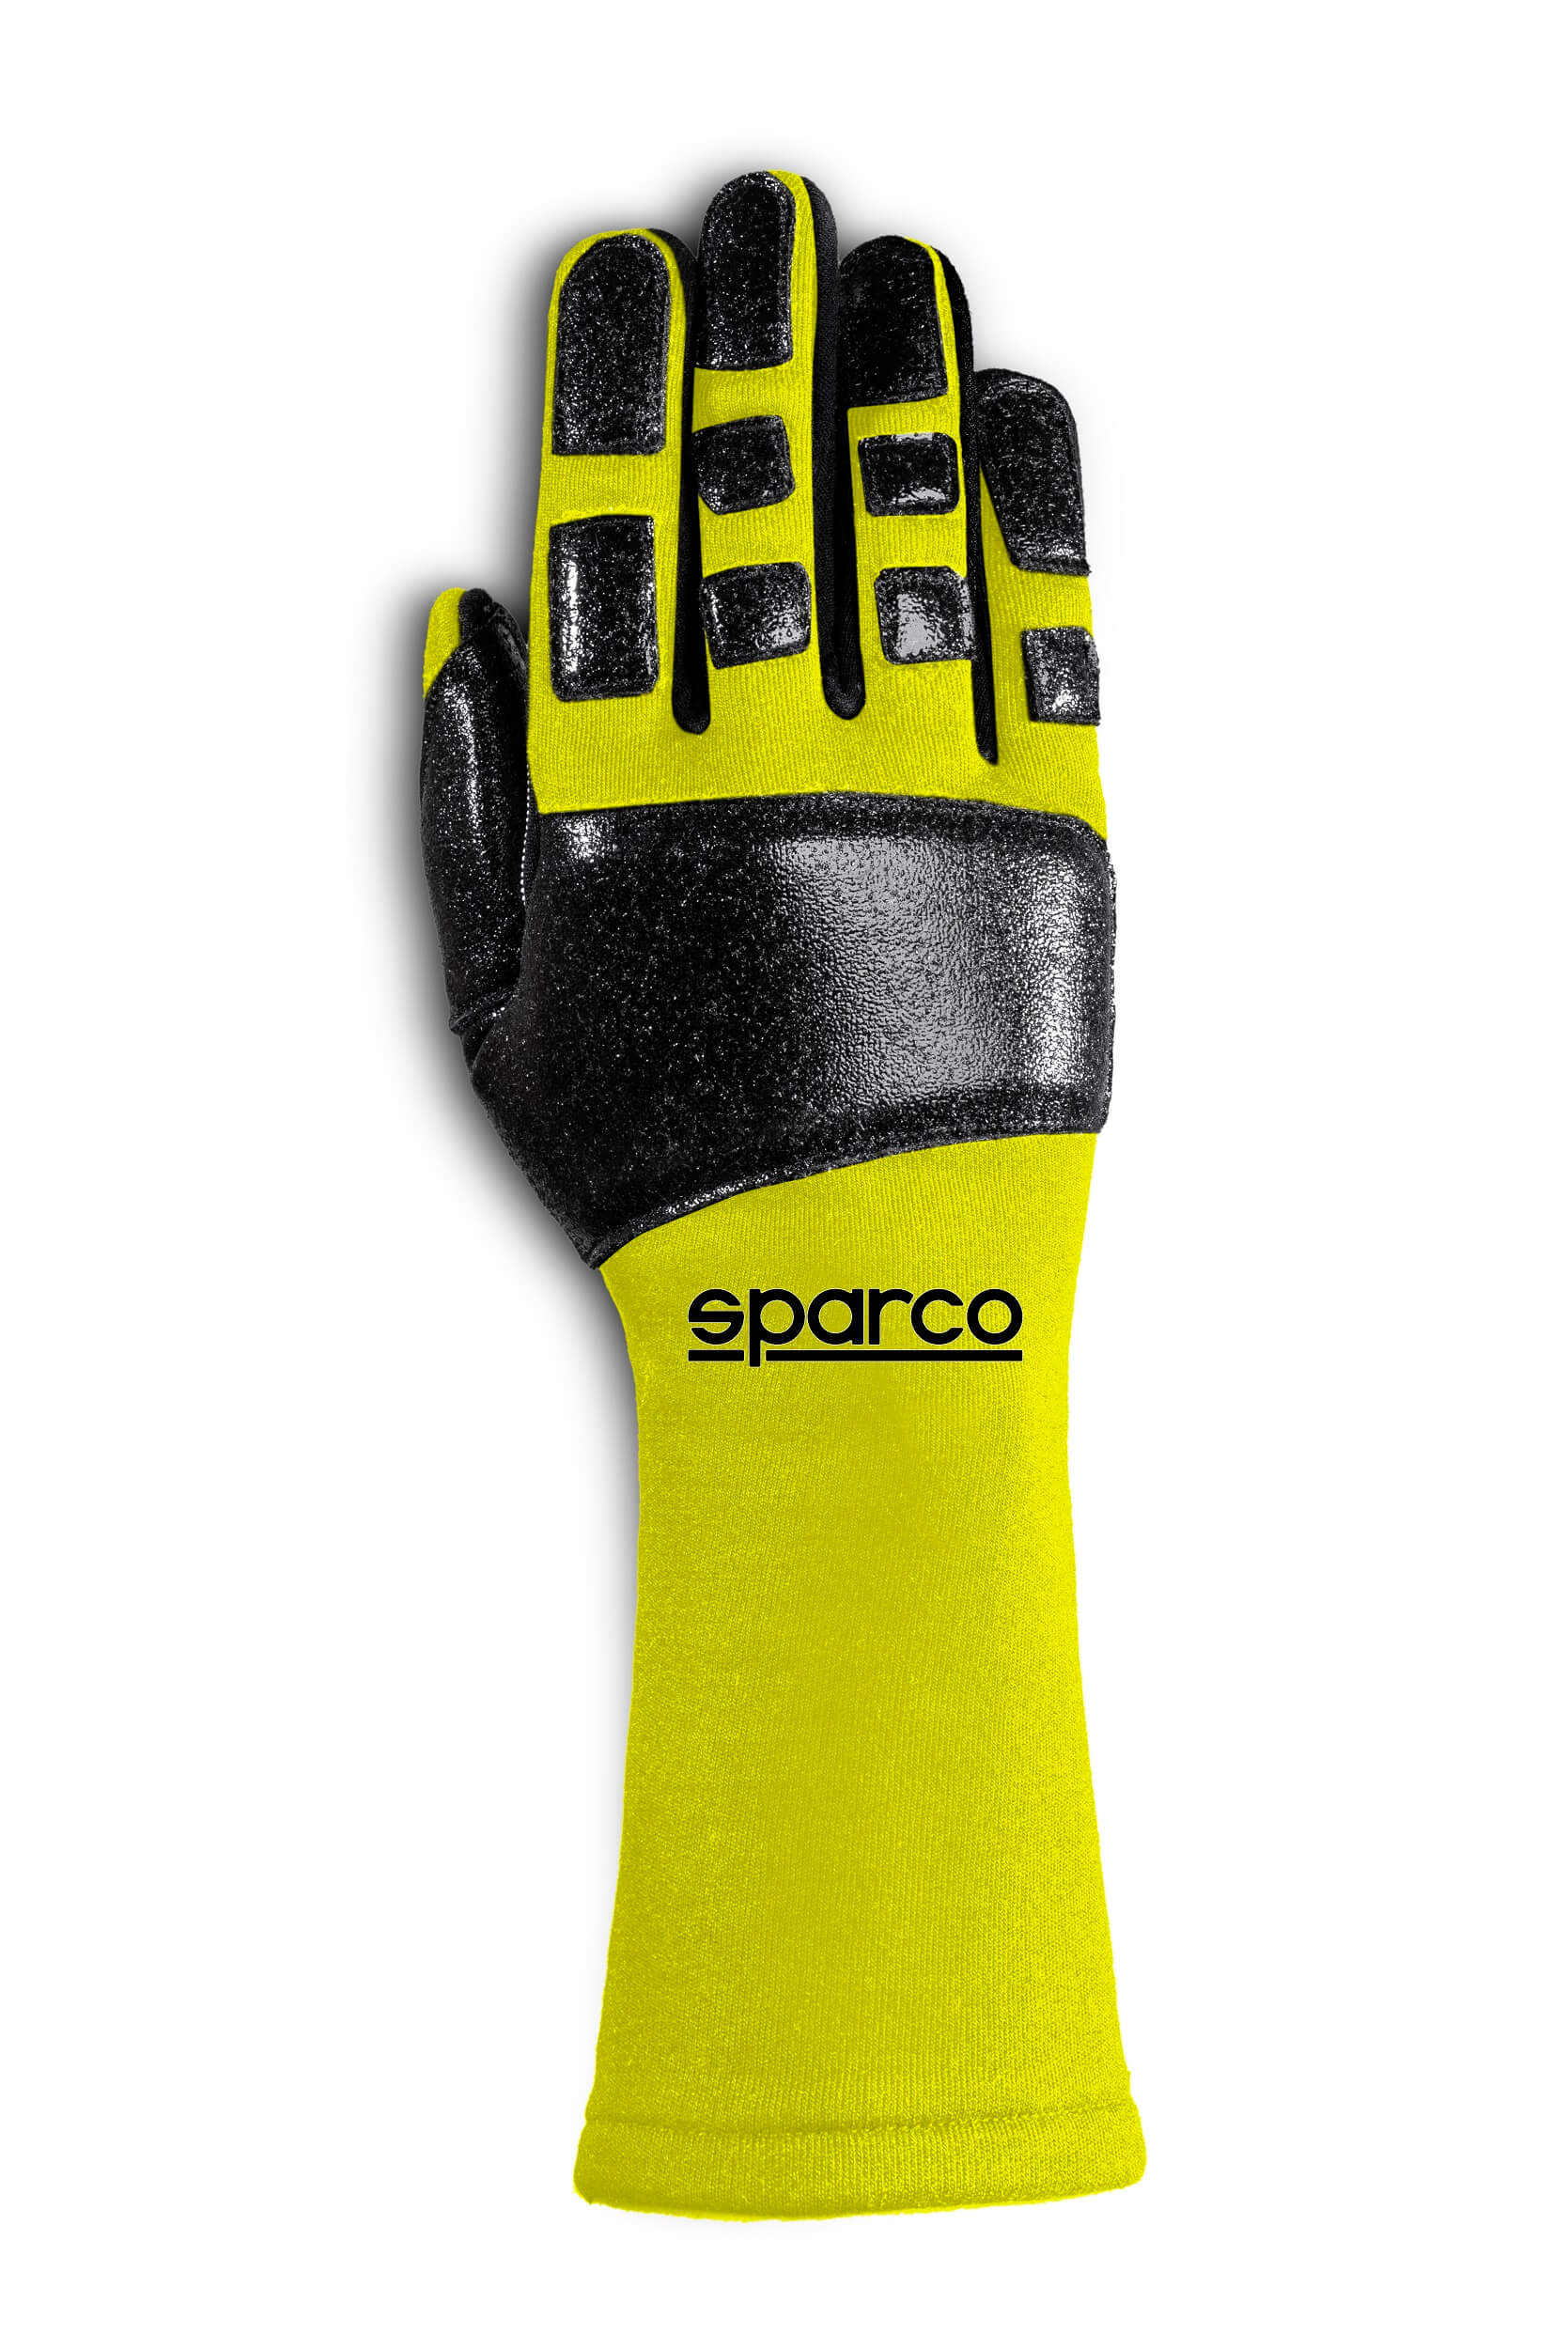 SPARCO 00131811GF TIDE MECA Gloves, NOT FIA, yellow, size 11 Photo-0 